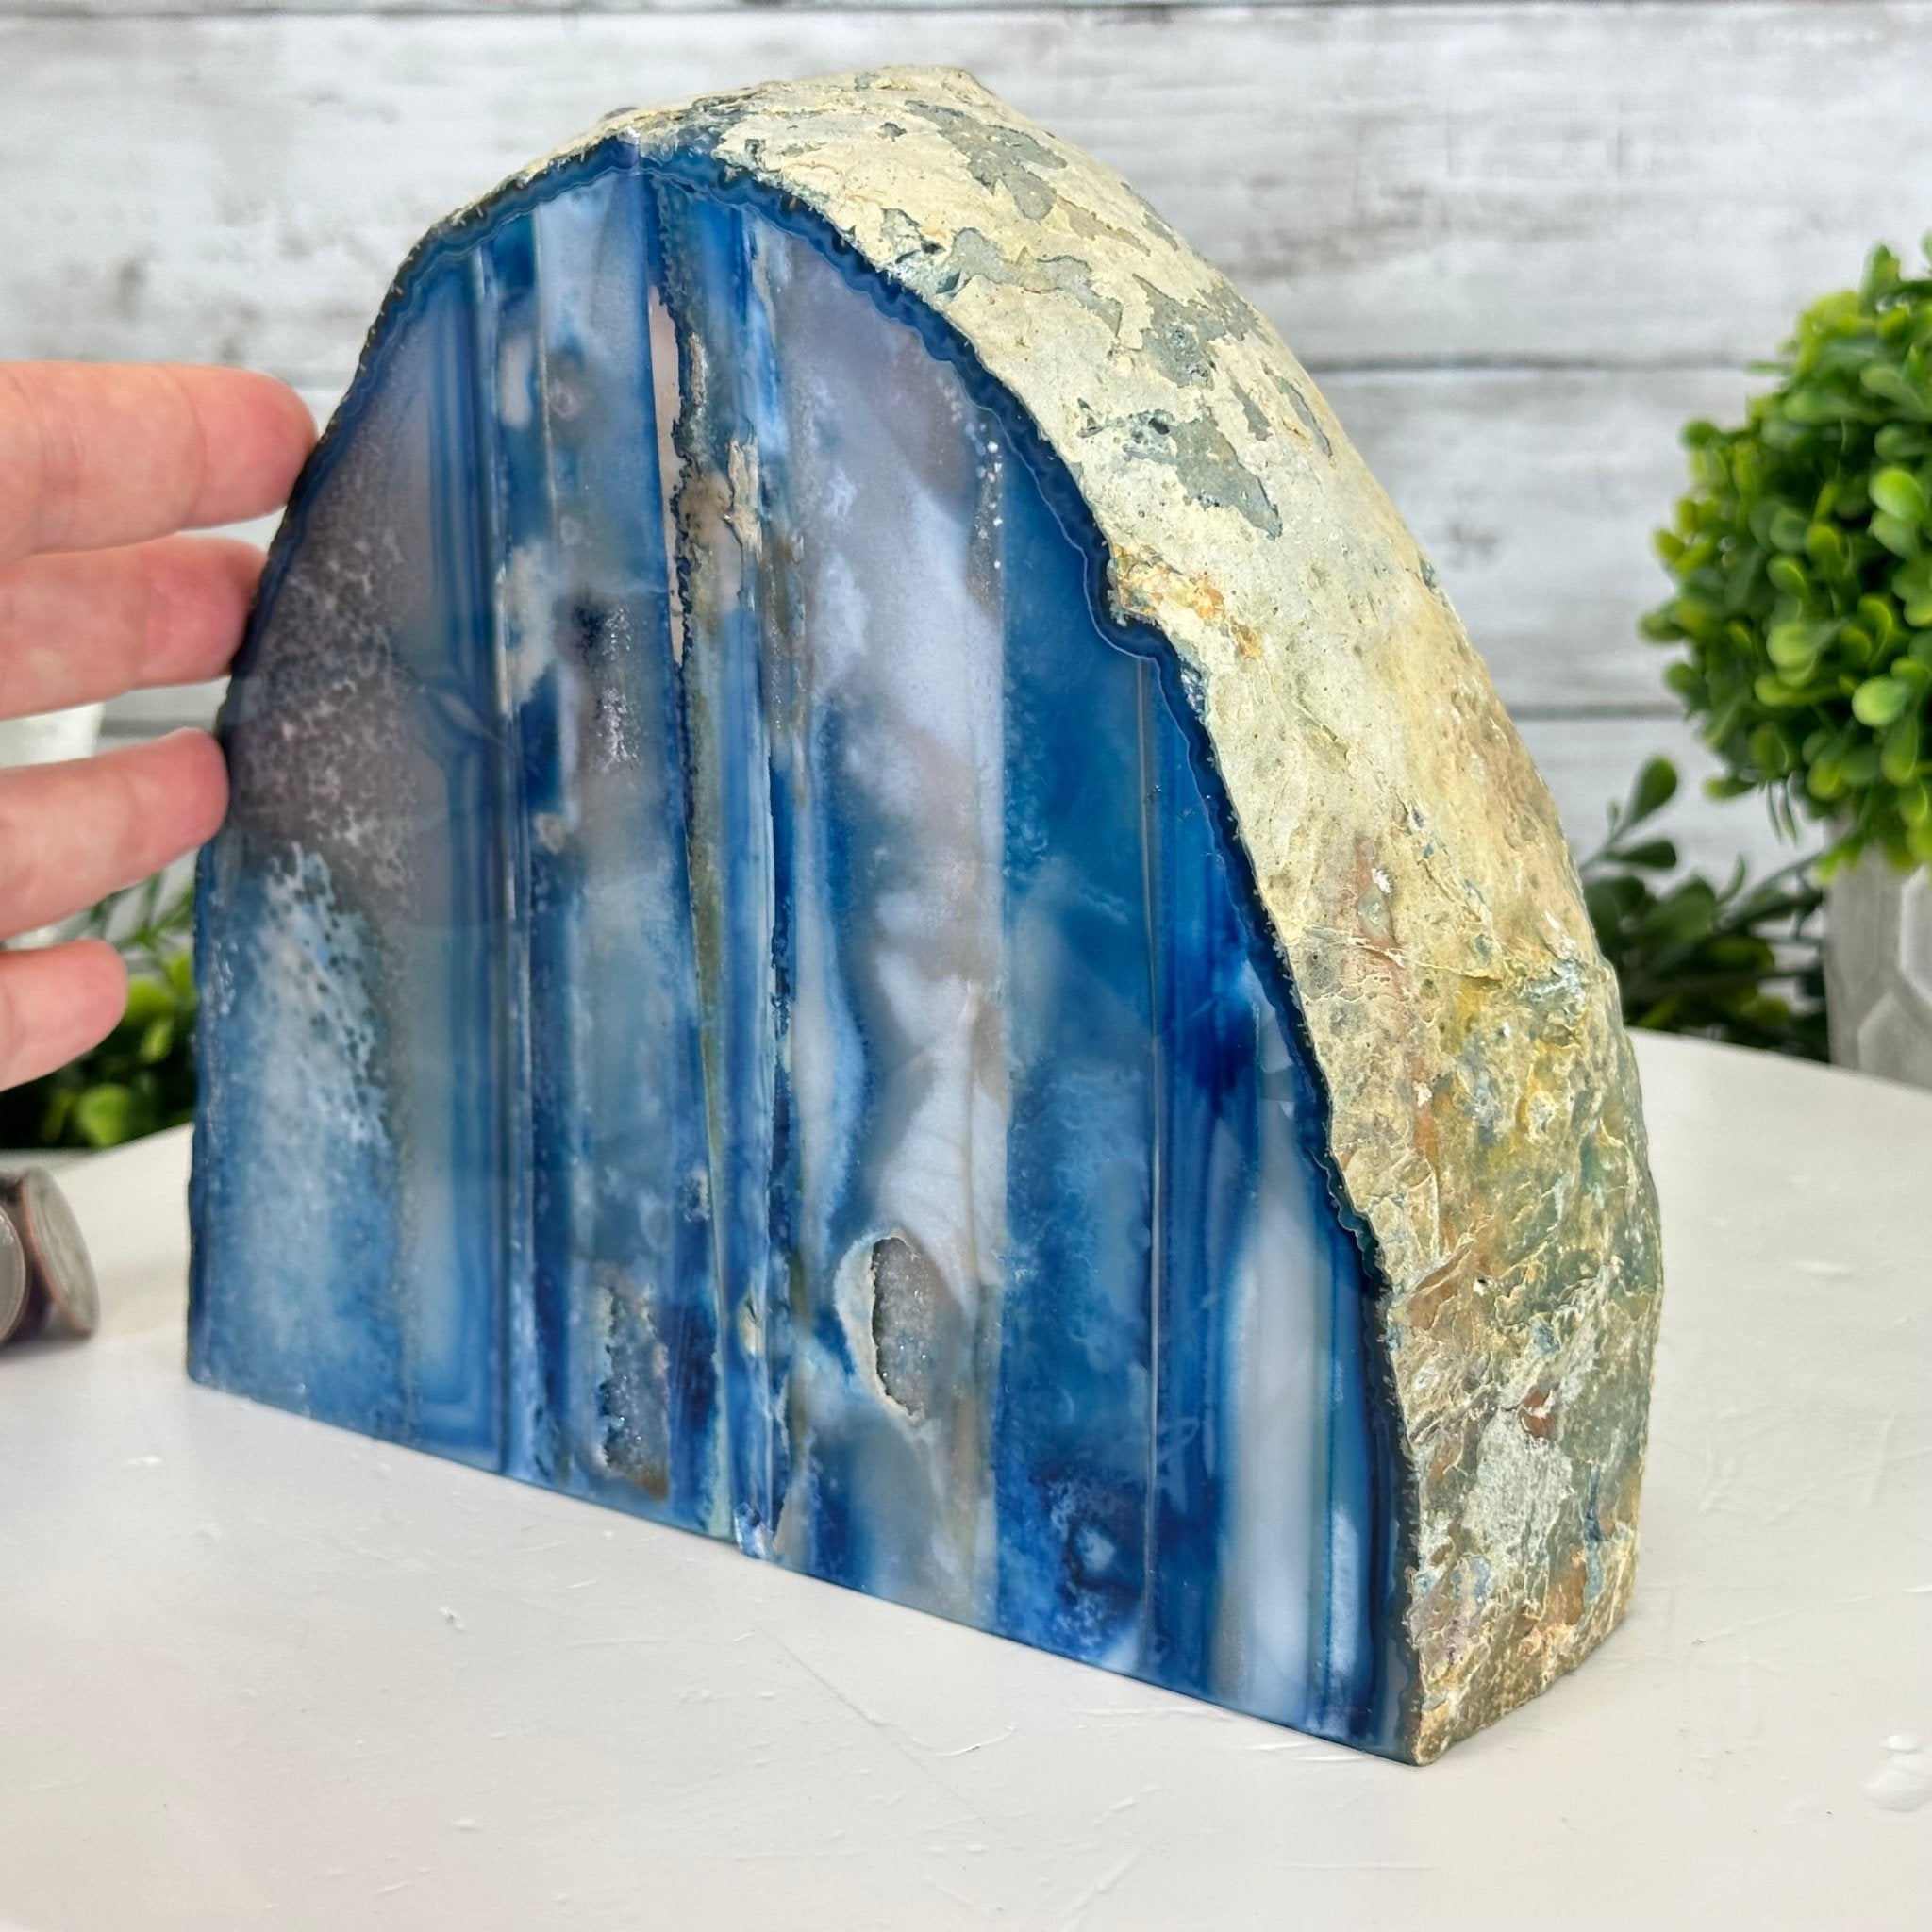 Blue Dyed Brazilian Agate Stone Bookends, 10.4 lbs & 6.7" tall #5151BL-037 - Brazil GemsBrazil GemsBlue Dyed Brazilian Agate Stone Bookends, 10.4 lbs & 6.7" tall #5151BL-037Bookends5151BL-037